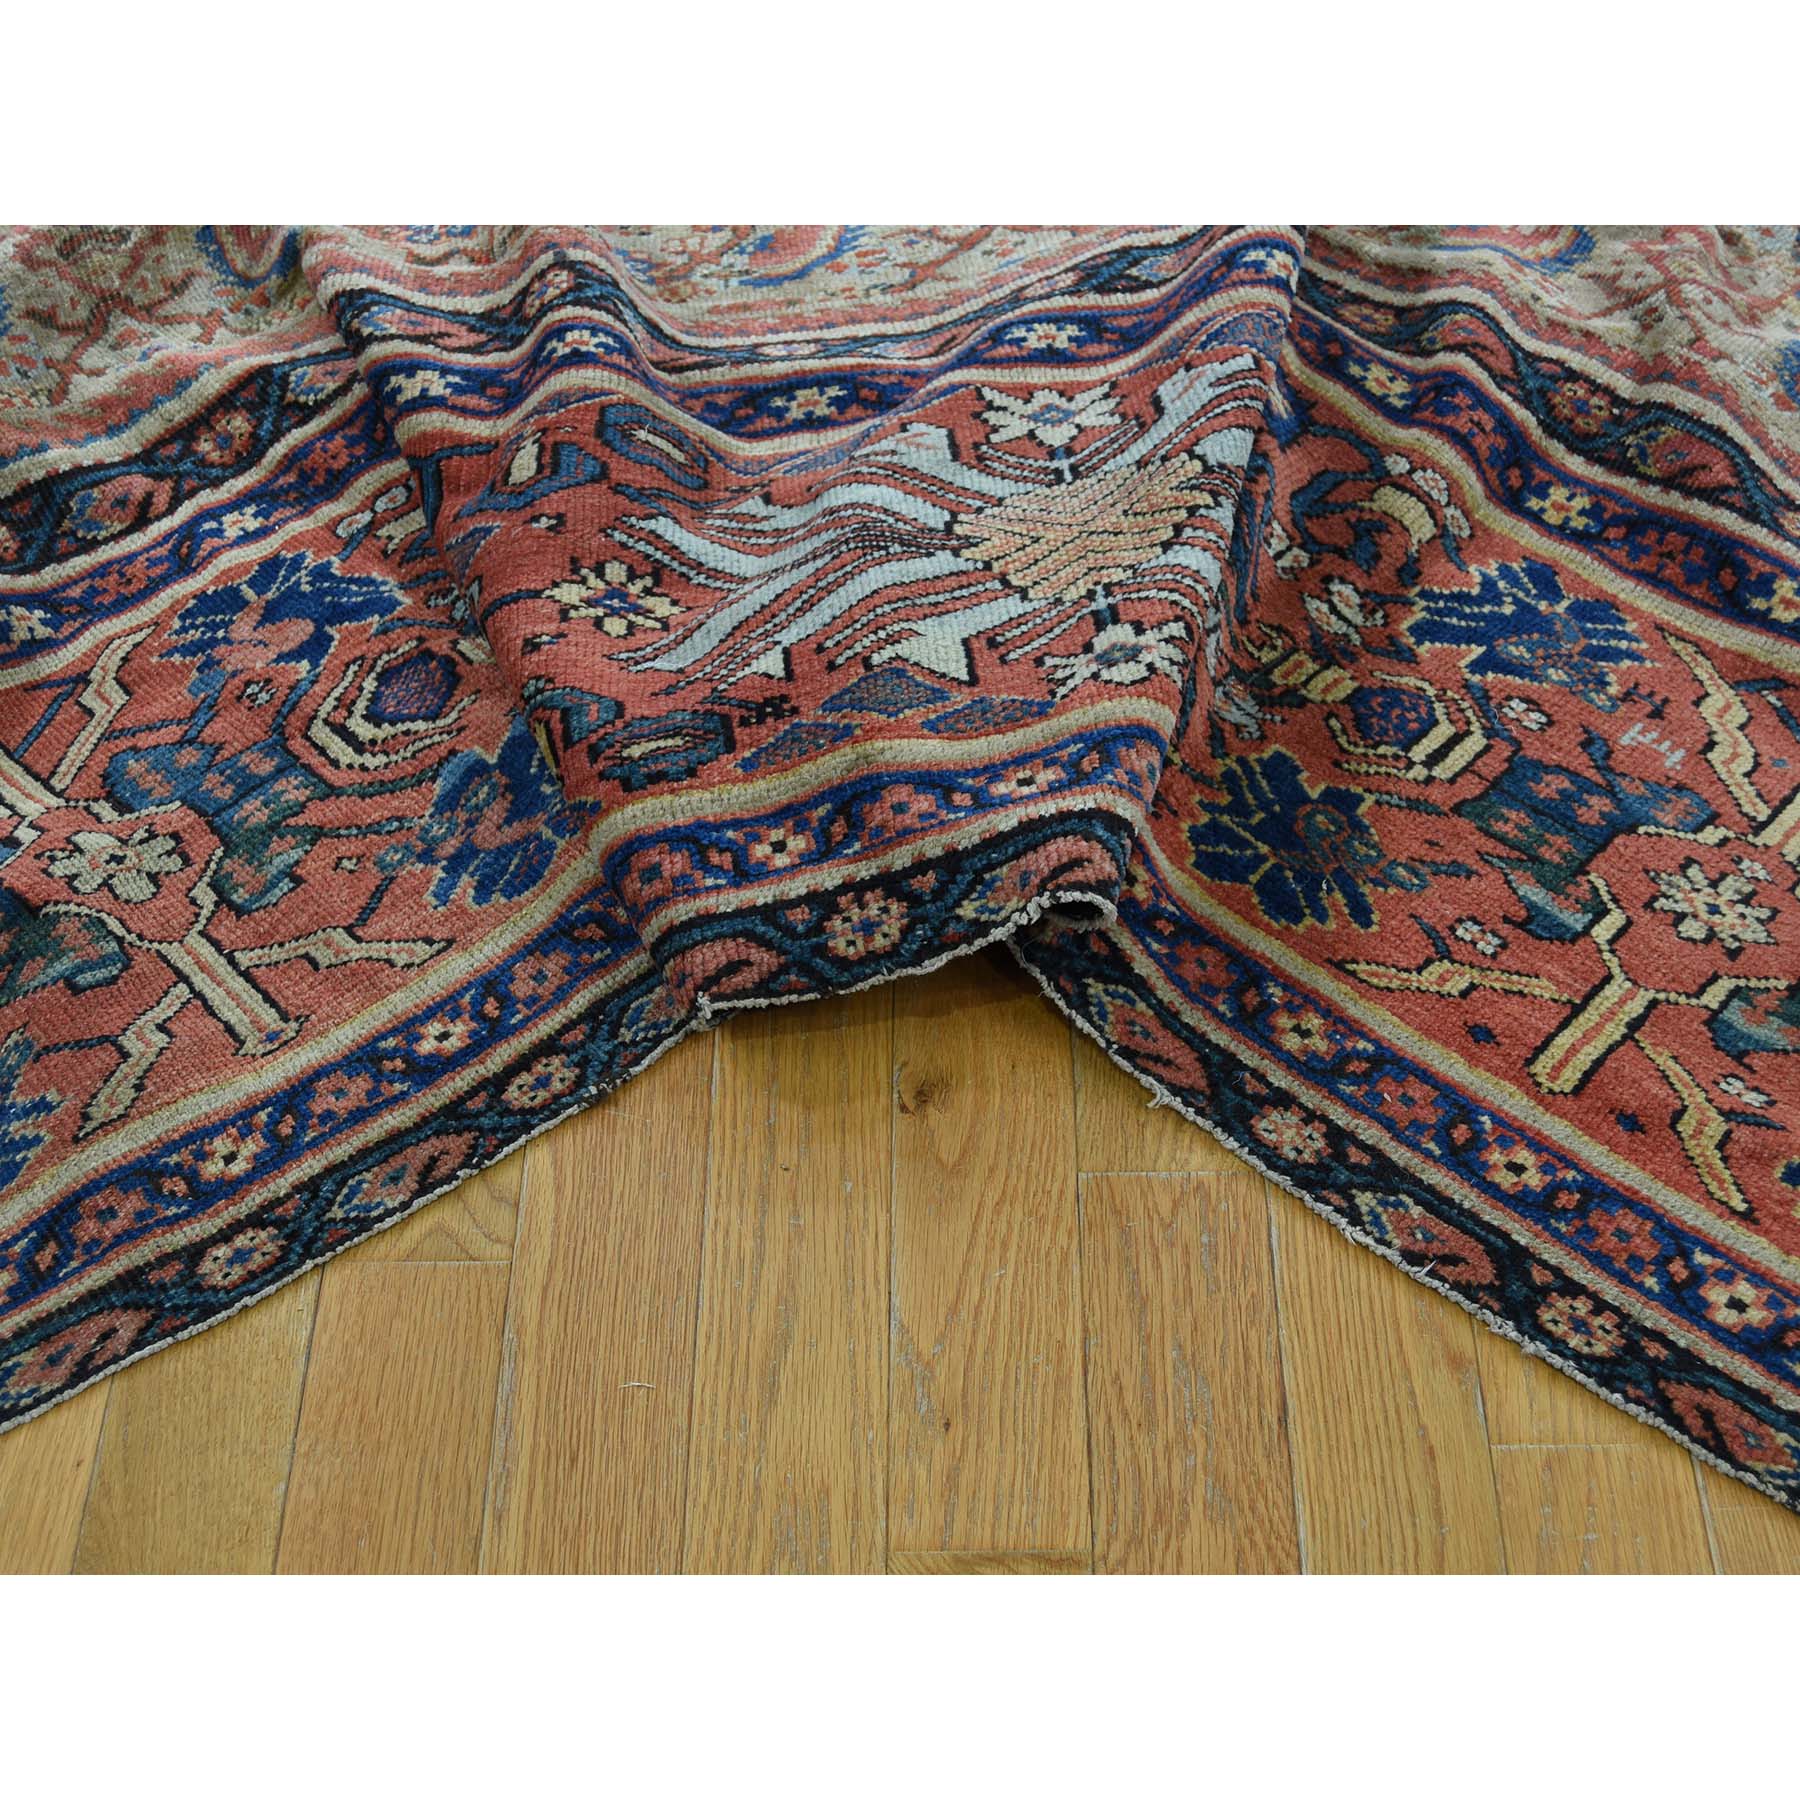 12-x18-3  Antique Persian Mahal Exc Cond Pure Wool Hand-Knotted Oversized Rug 